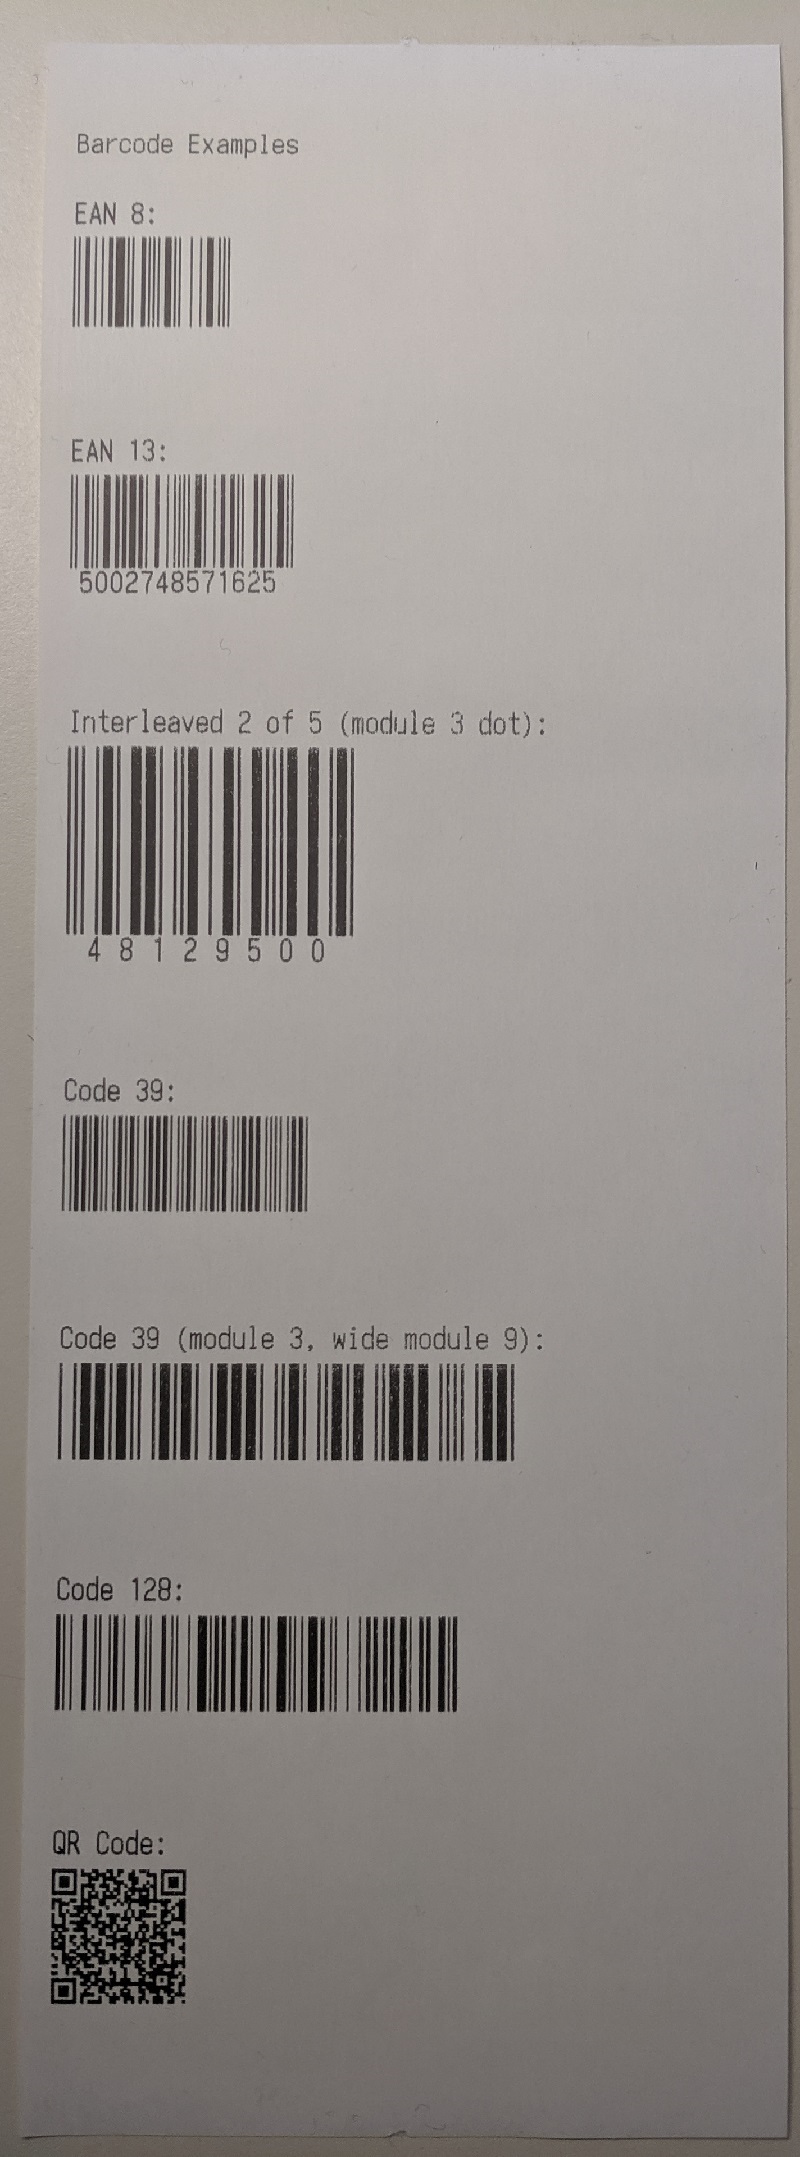 ../../_images/barcodes_80mm.jpg